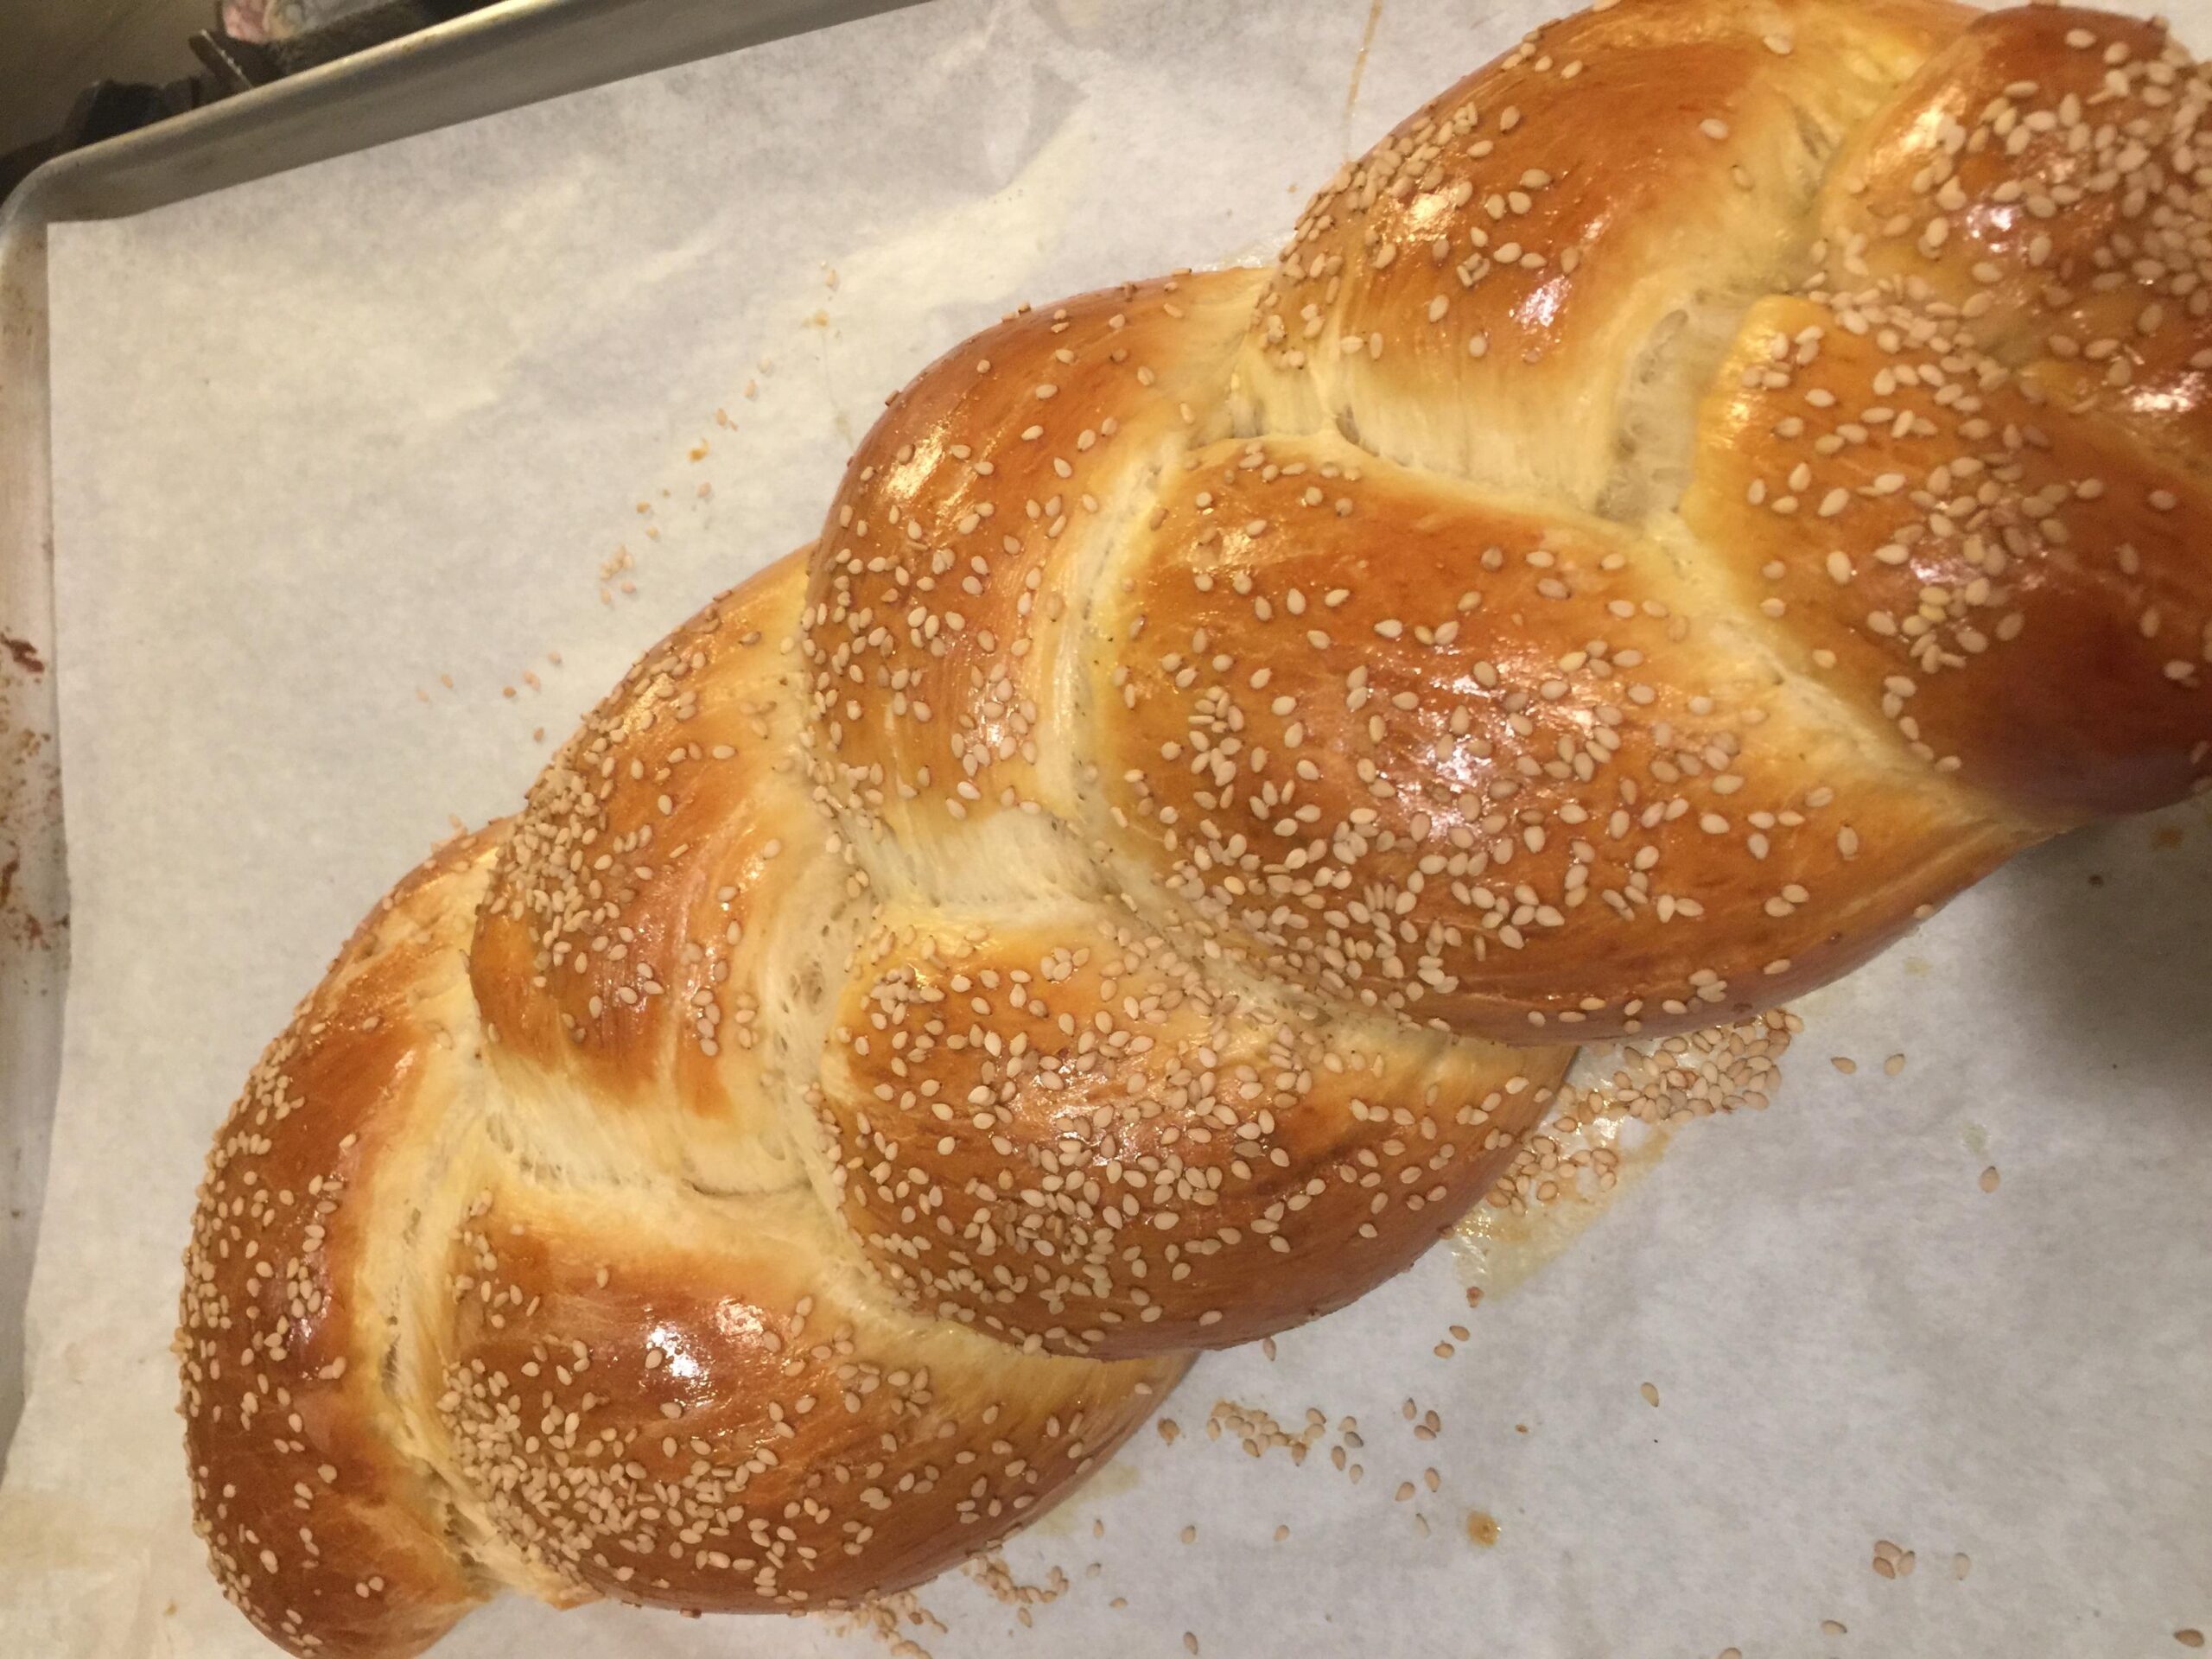  The golden crust on this challah will make you drool